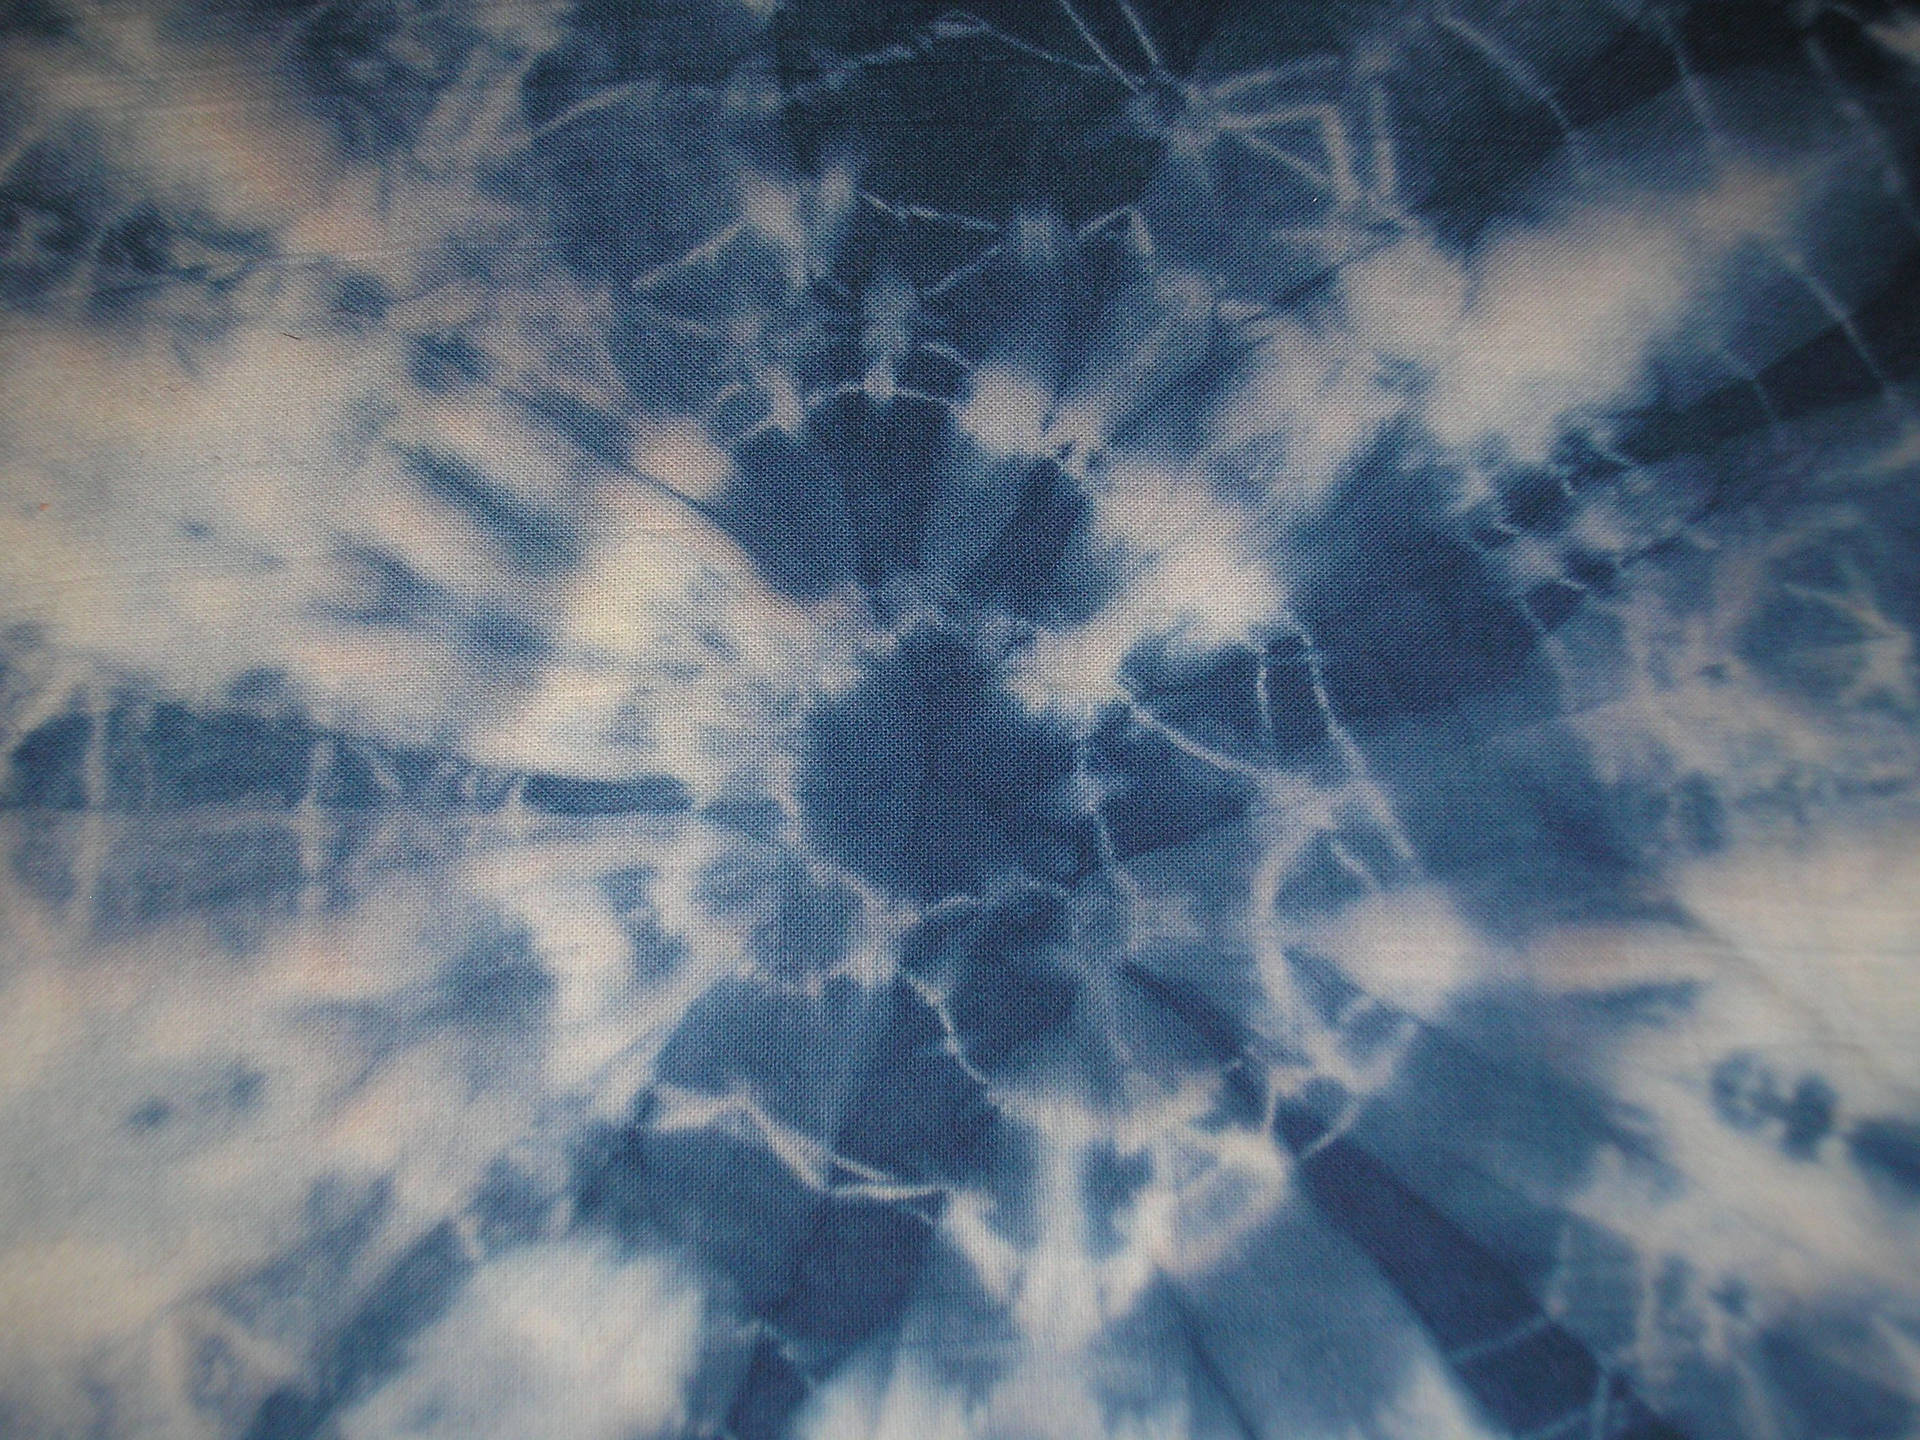 Tie Dye 2816X2112 Wallpaper and Background Image